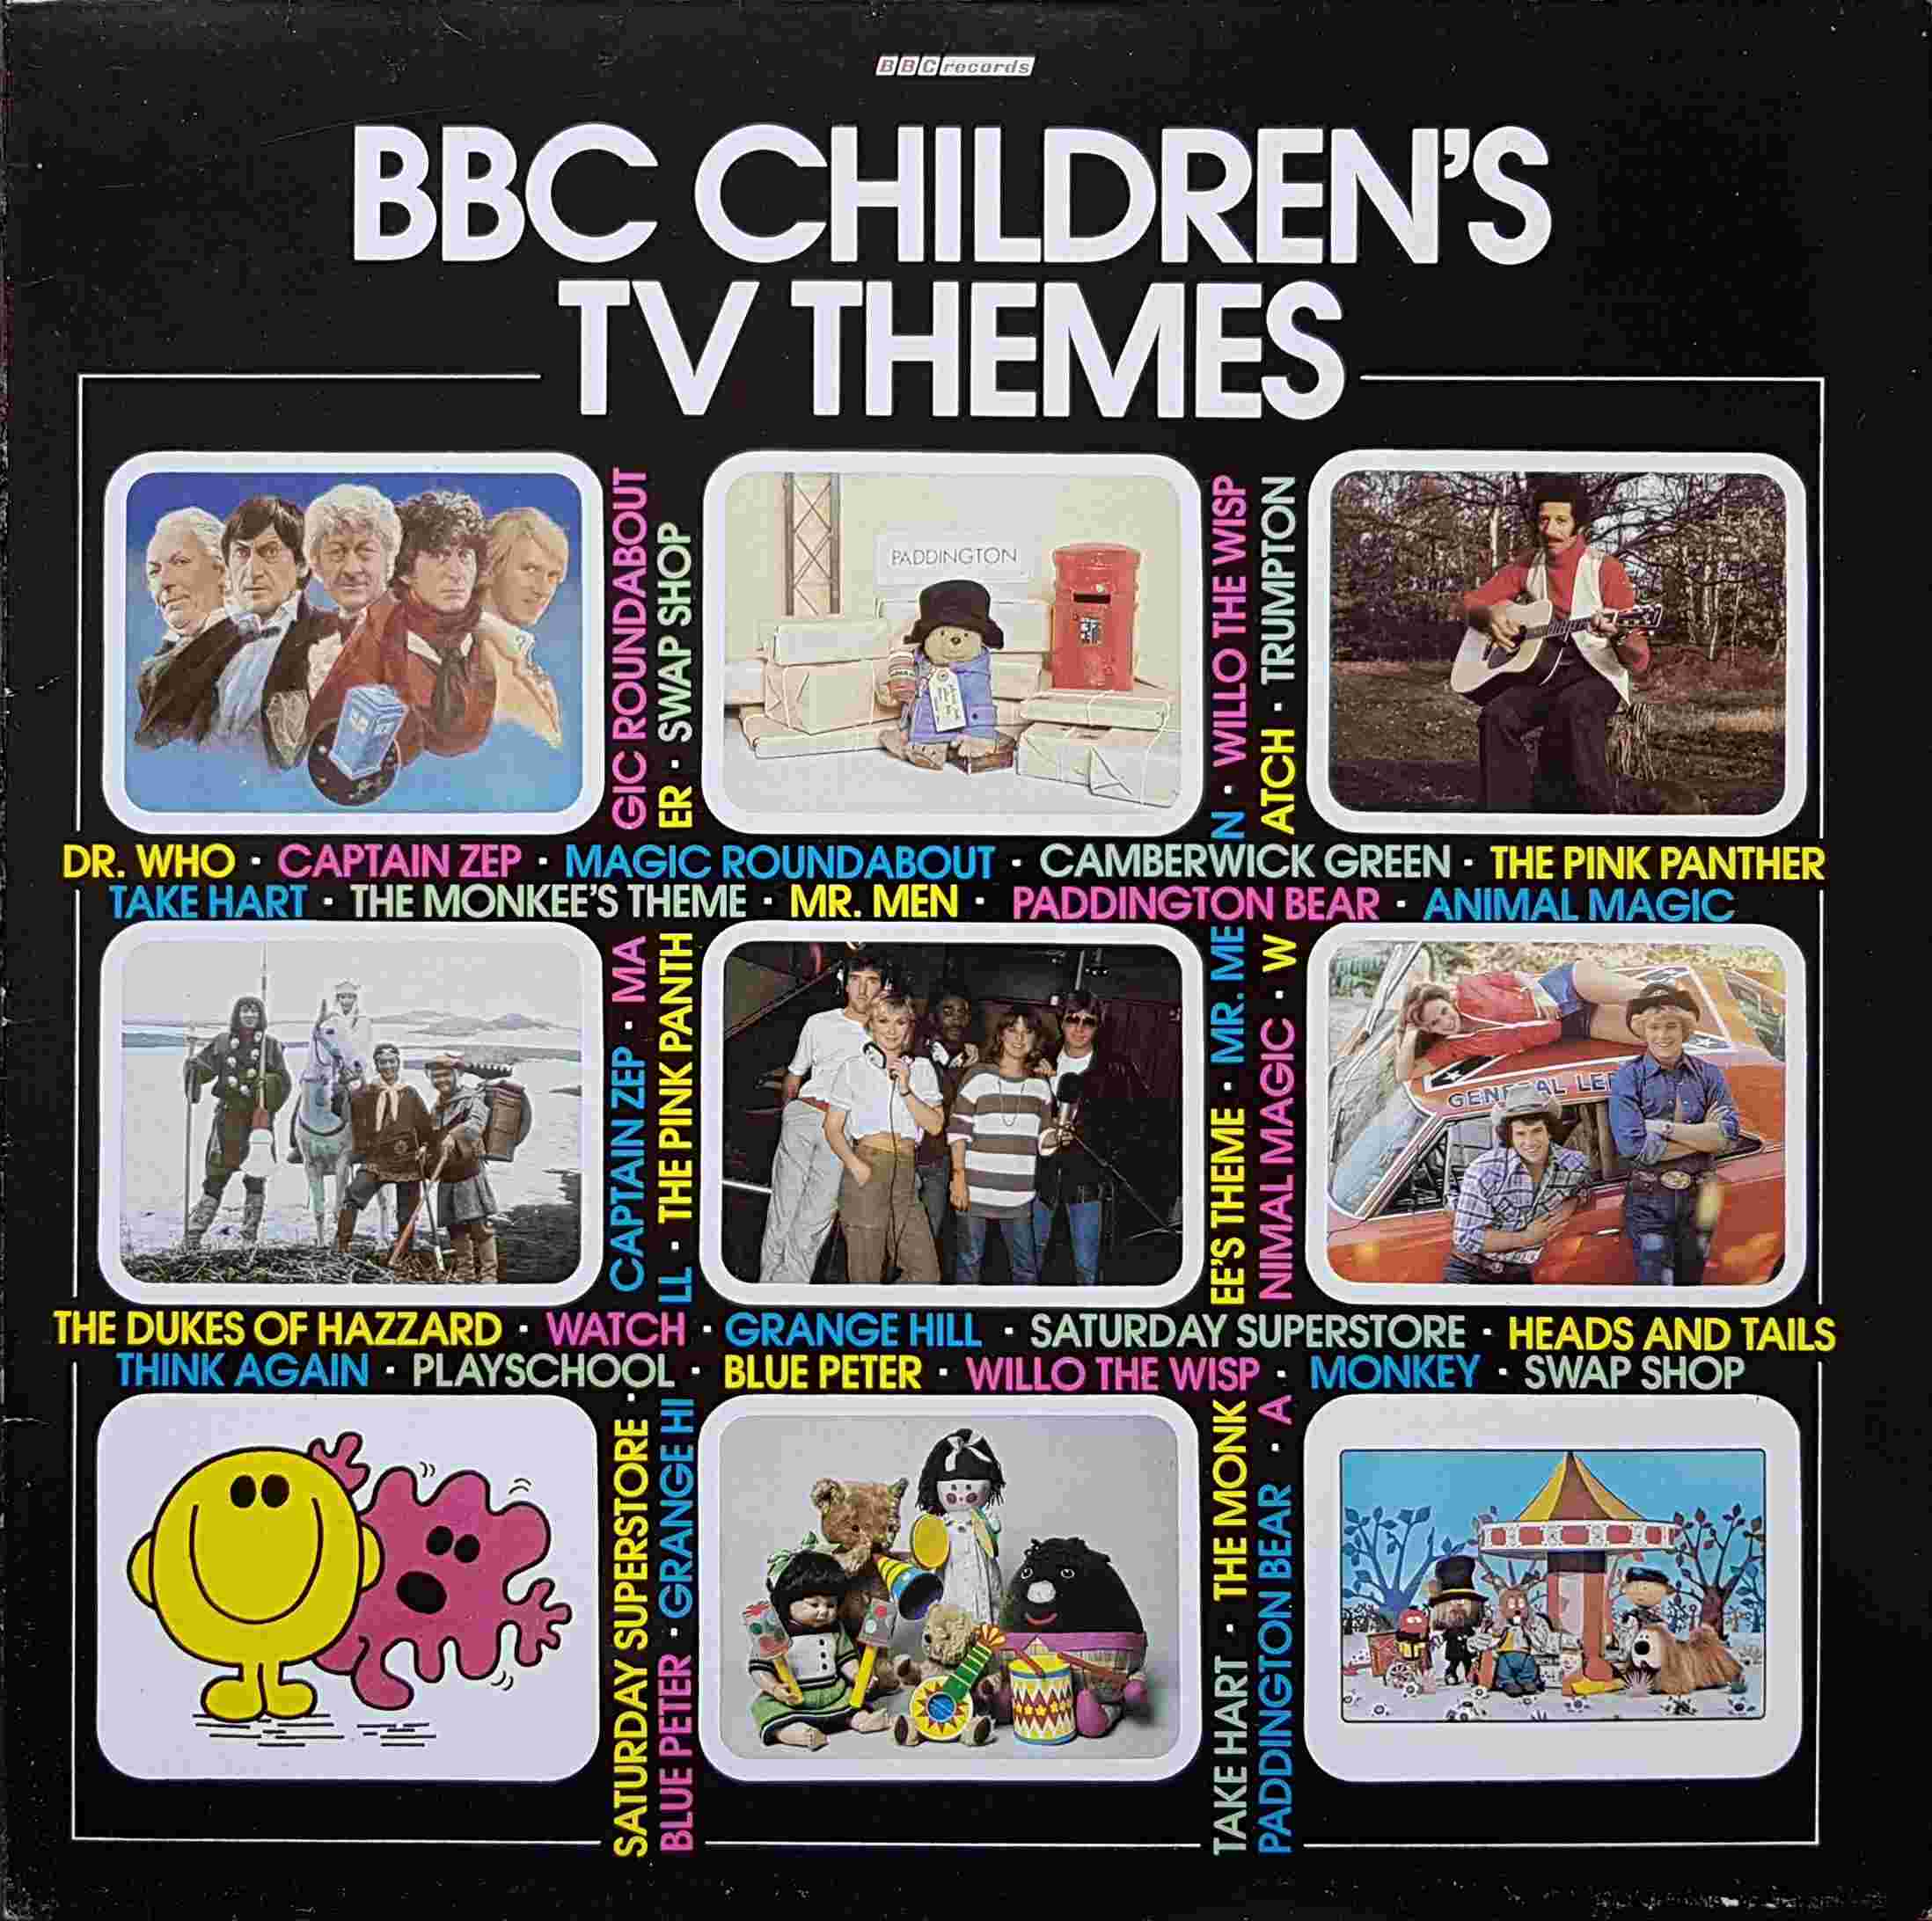 Picture of REH 486 BBC children's TV themes (Includes BBC info sheet) by artist Various from the BBC albums - Records and Tapes library